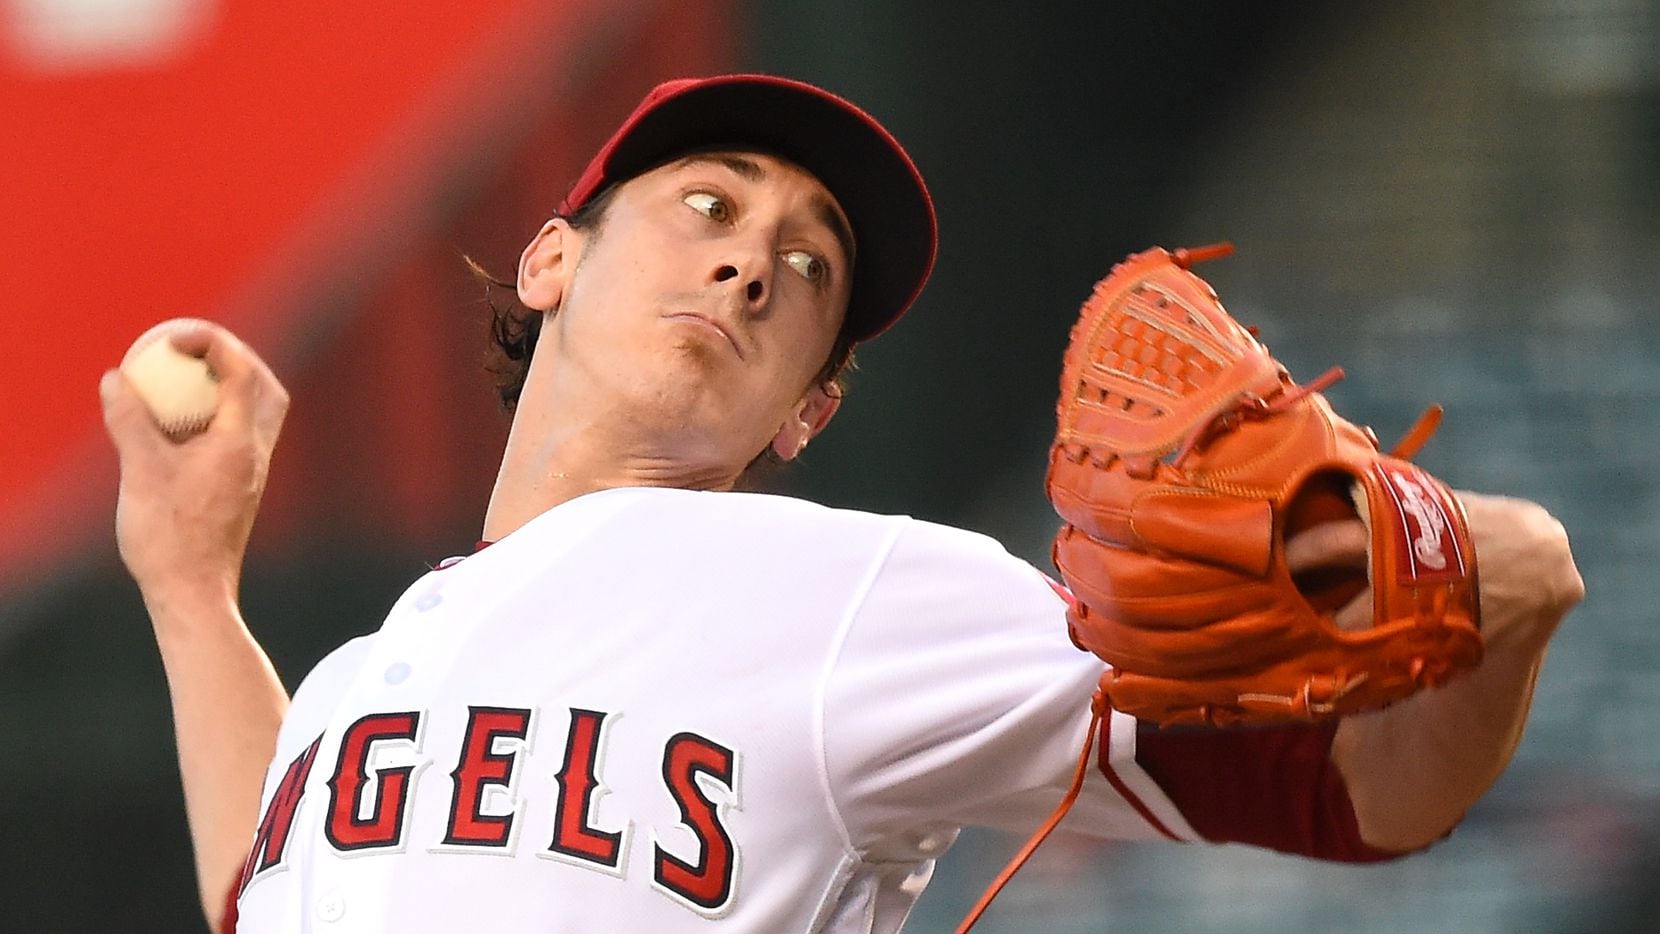 ANAHEIM, CA - JULY 29:  Tim Lincecum (#55) of the Los Angeles Angels is pictured during the second inning of a game against the Boston Red Sox at Angel Stadium of Anaheim on July 29, 2016, in Anaheim, Calif.  (Photo by Jayne Kamin-Oncea/Getty Images)